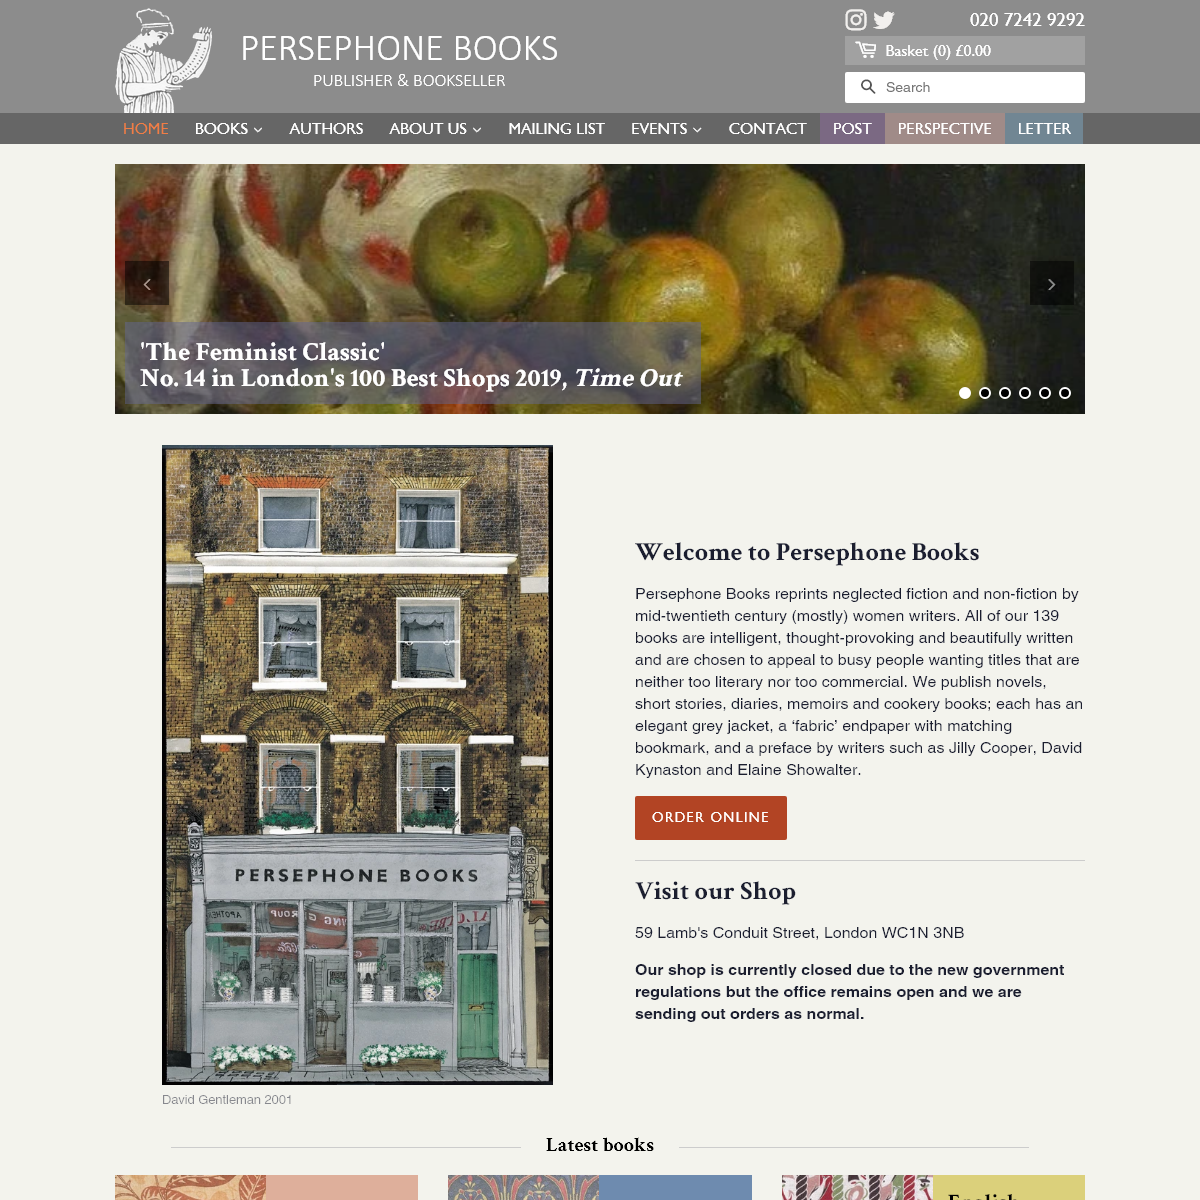 A complete backup of persephonebooks.co.uk